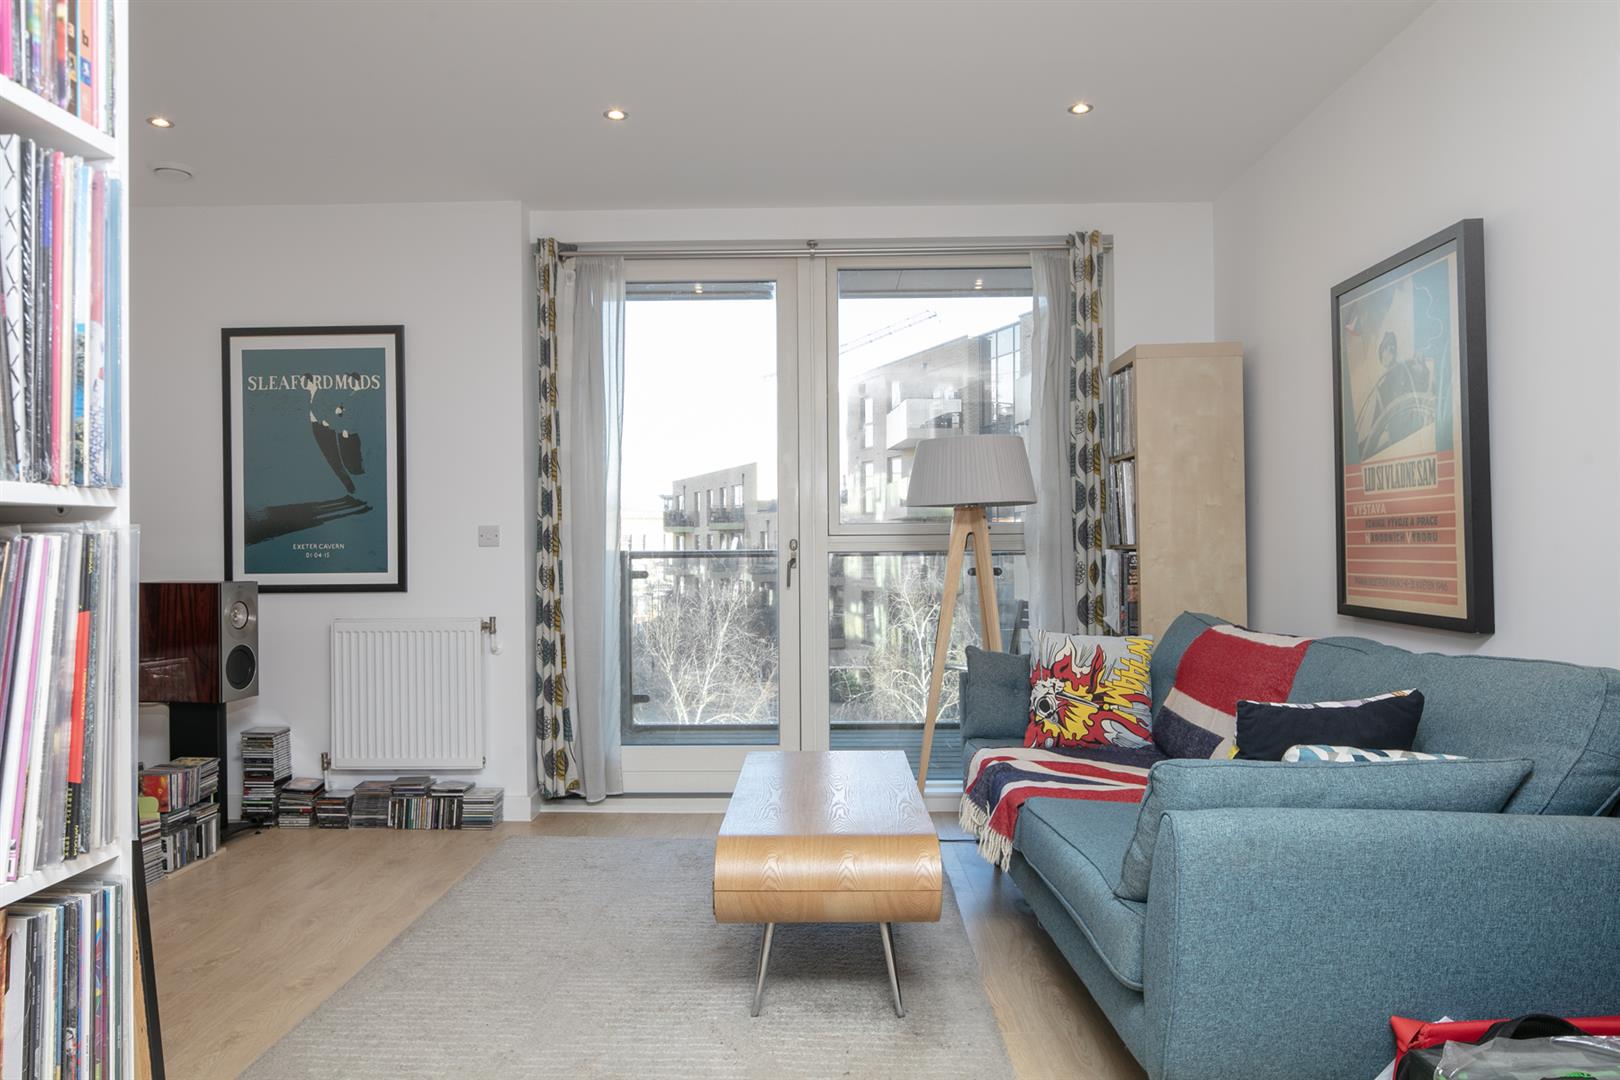 Flat/Apartment For Sale in Edmund Street, Camberwell, SE5 1176 view6